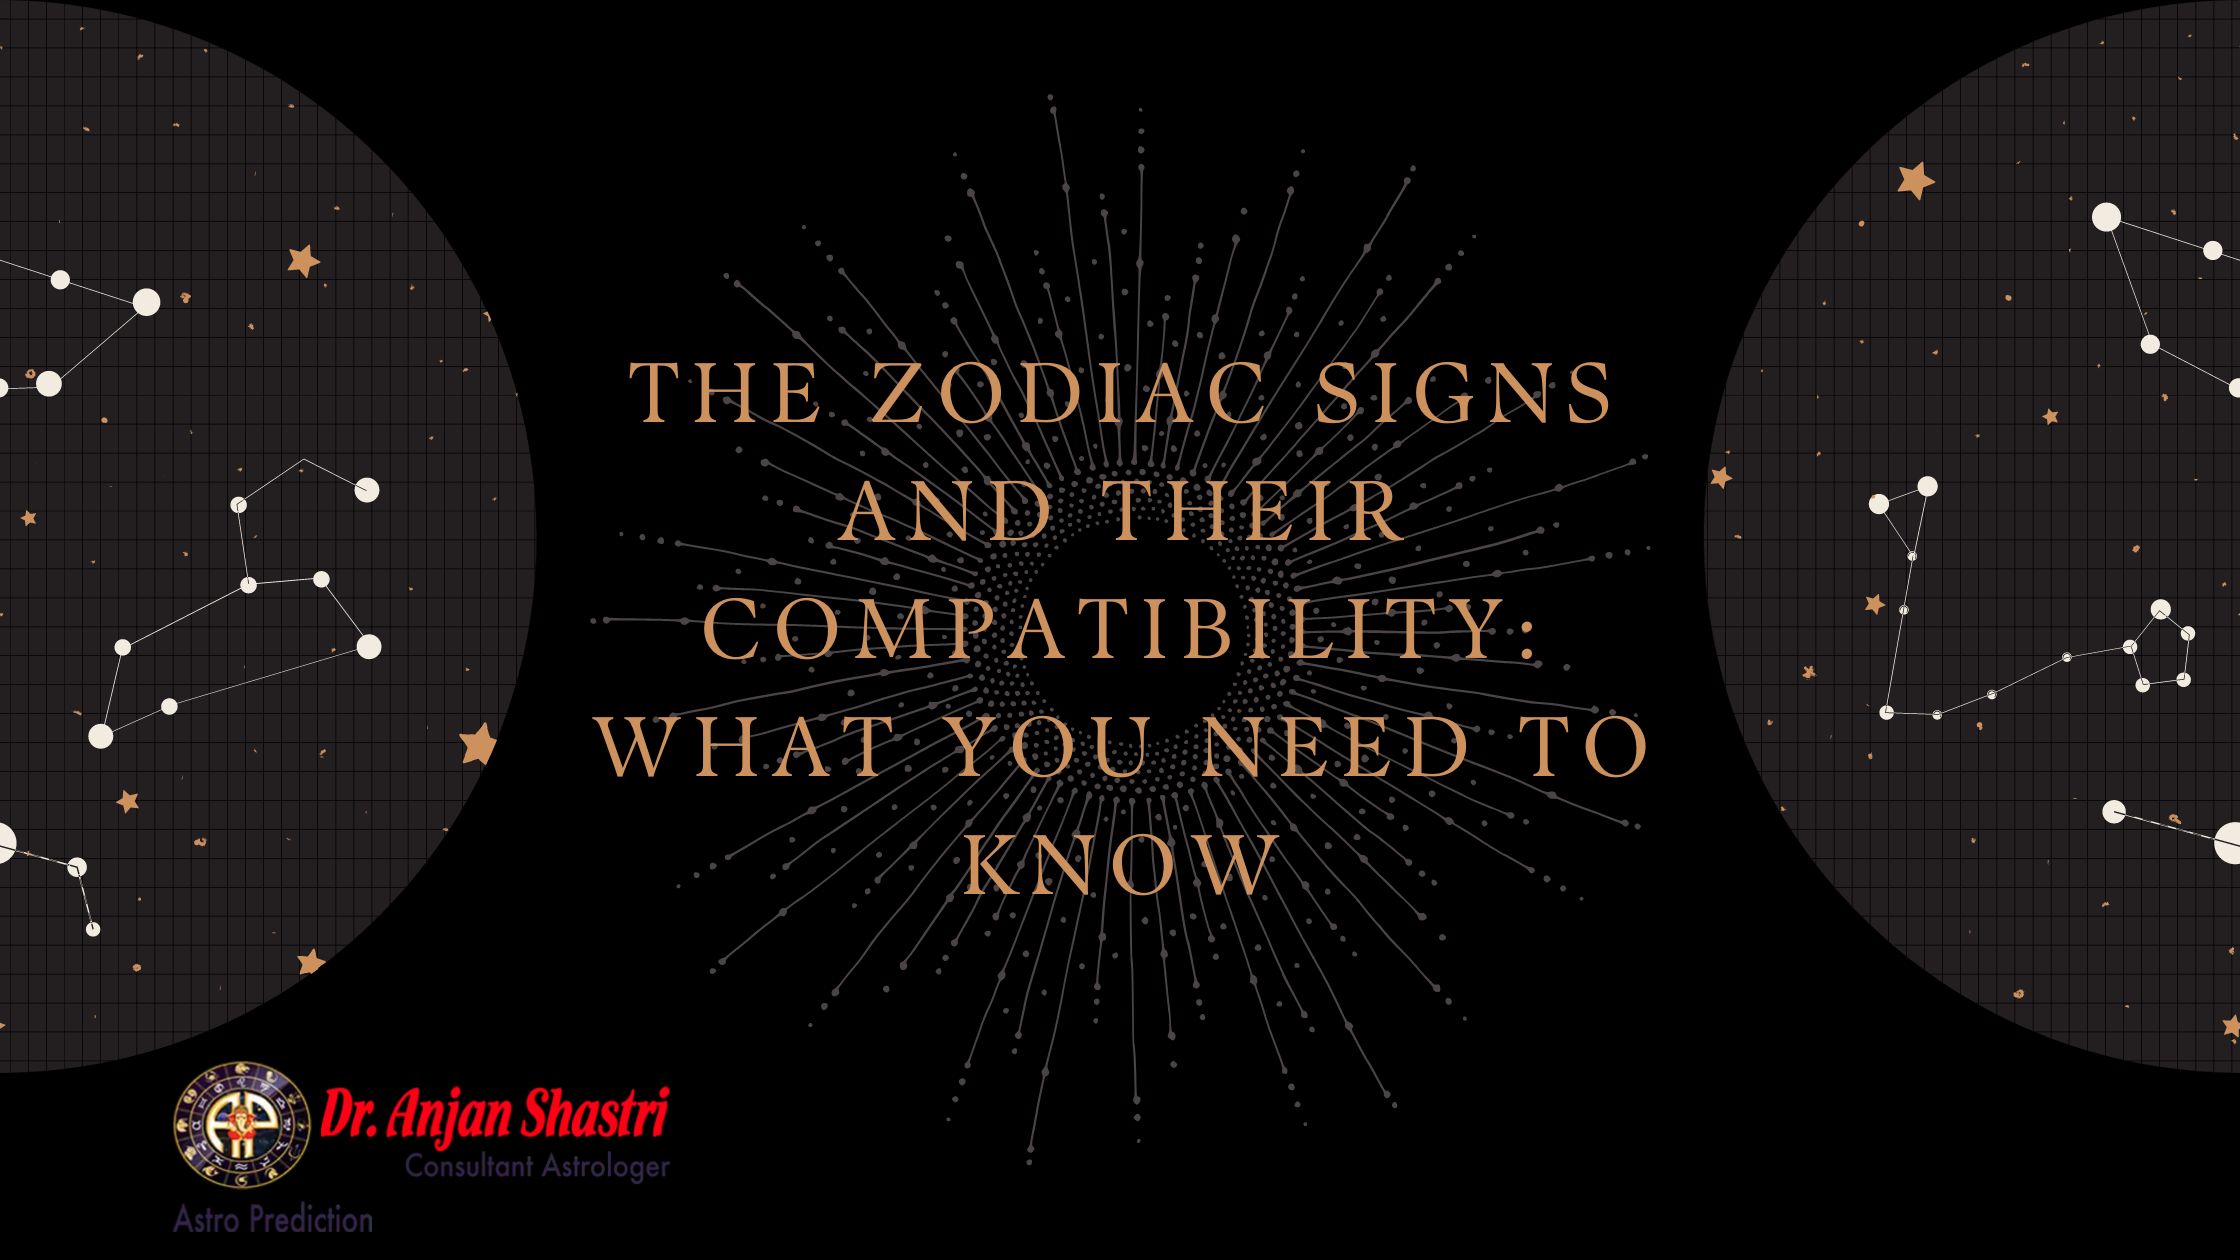 The Zodiac Signs and Their Compatibility: What You Need to Know